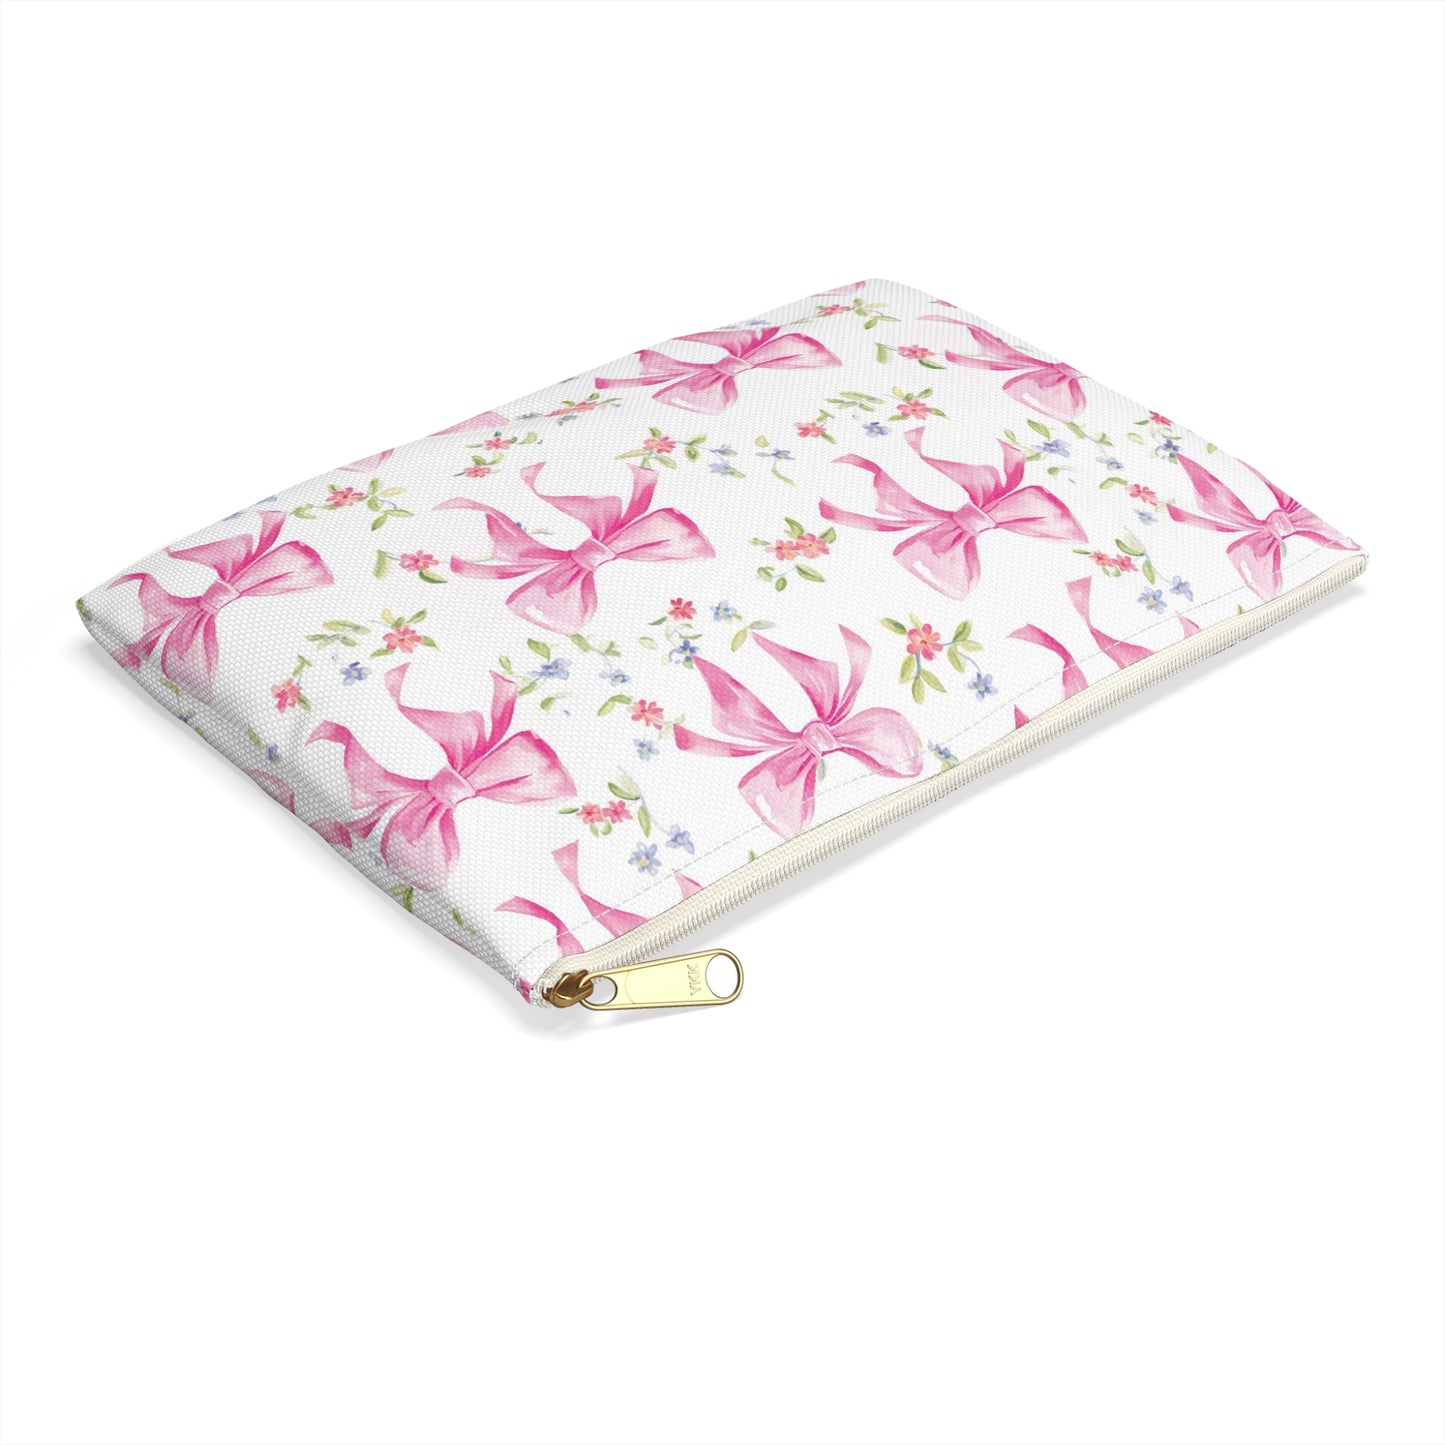 LP - Pink Bow Accessory Pouch